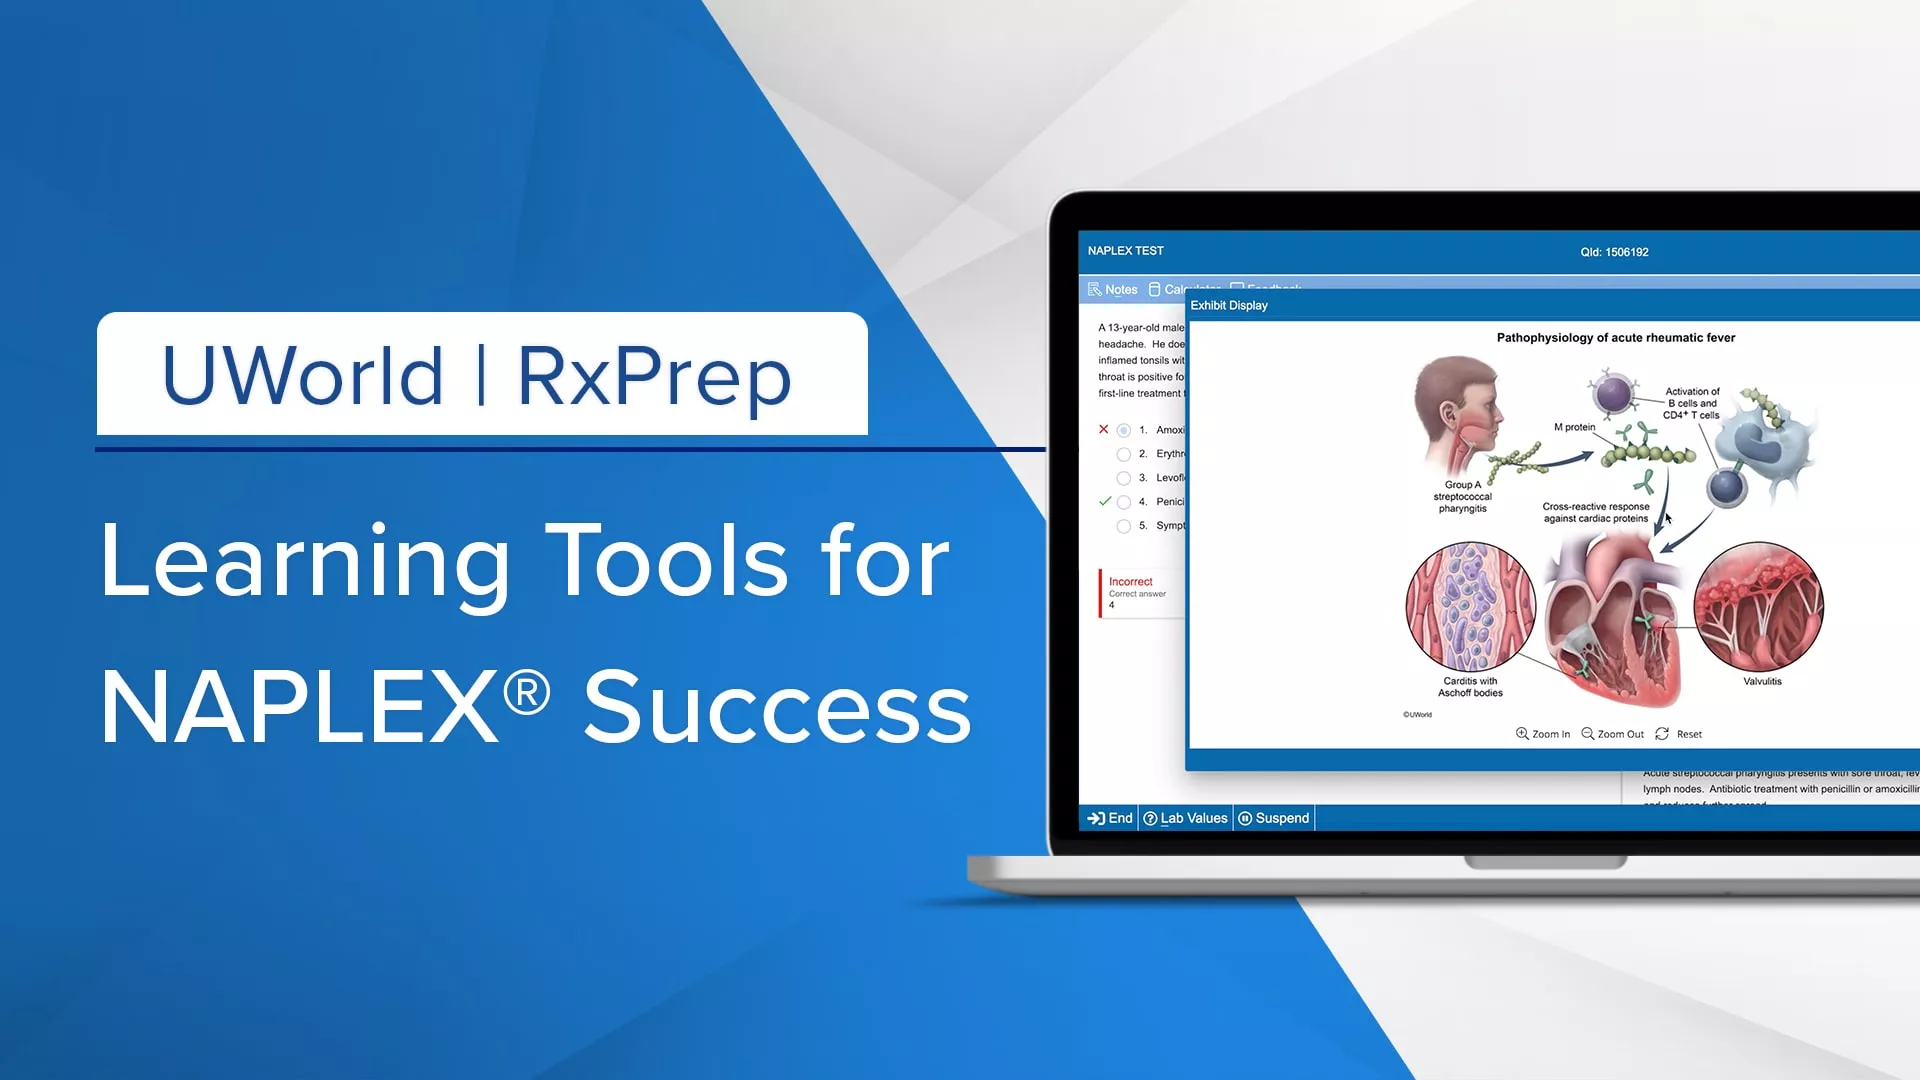 Image showing UWorld RxPrep’s learning tools for NAPLEX success